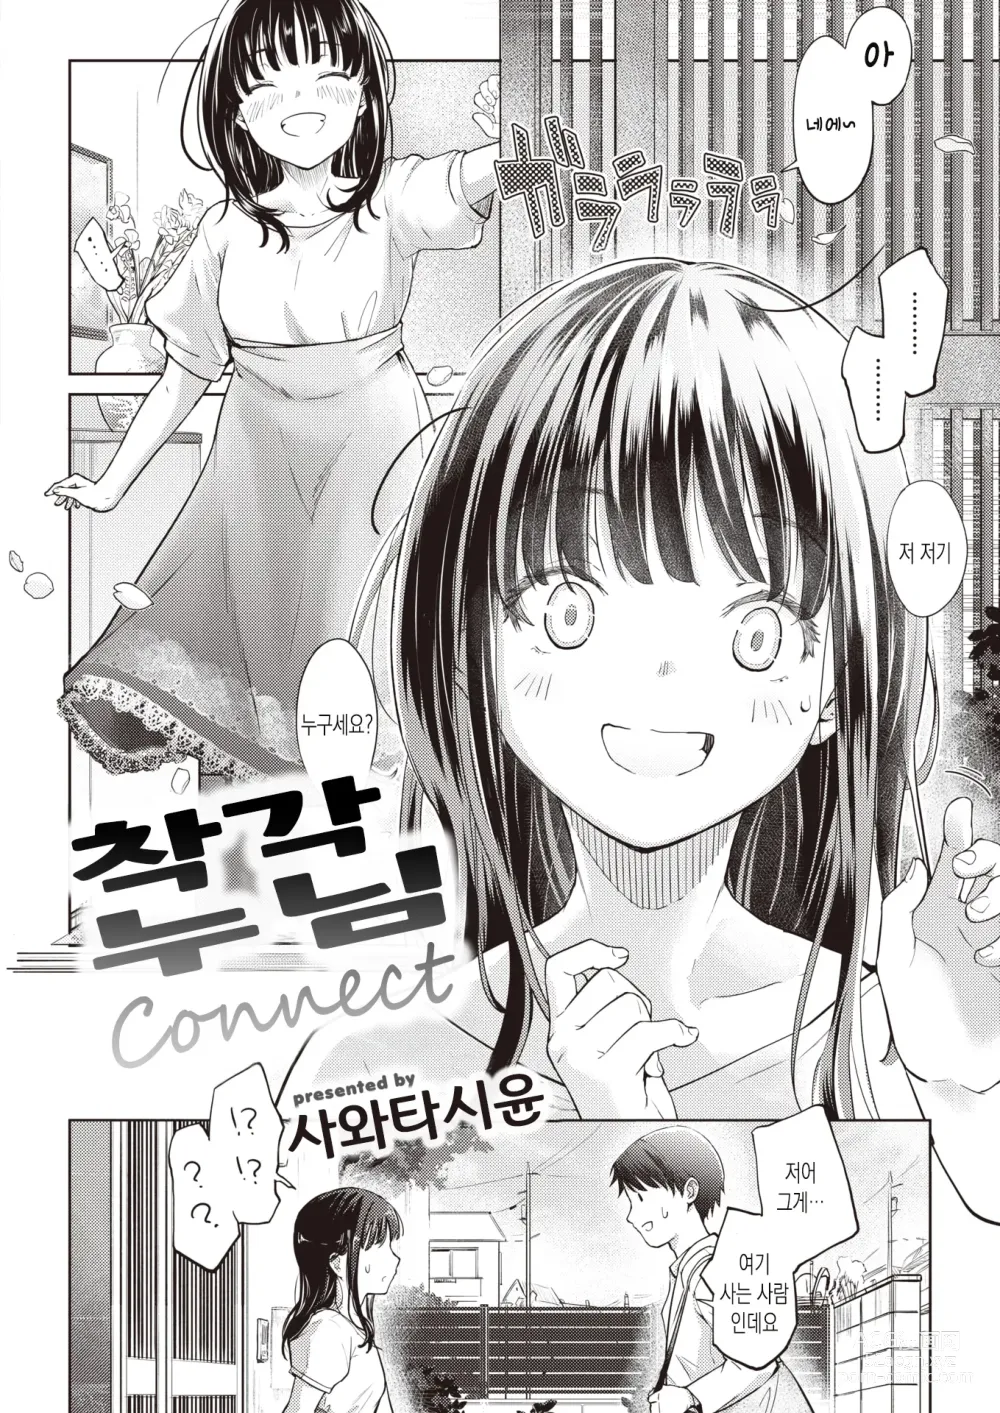 Page 2 of manga 착각누님Connect